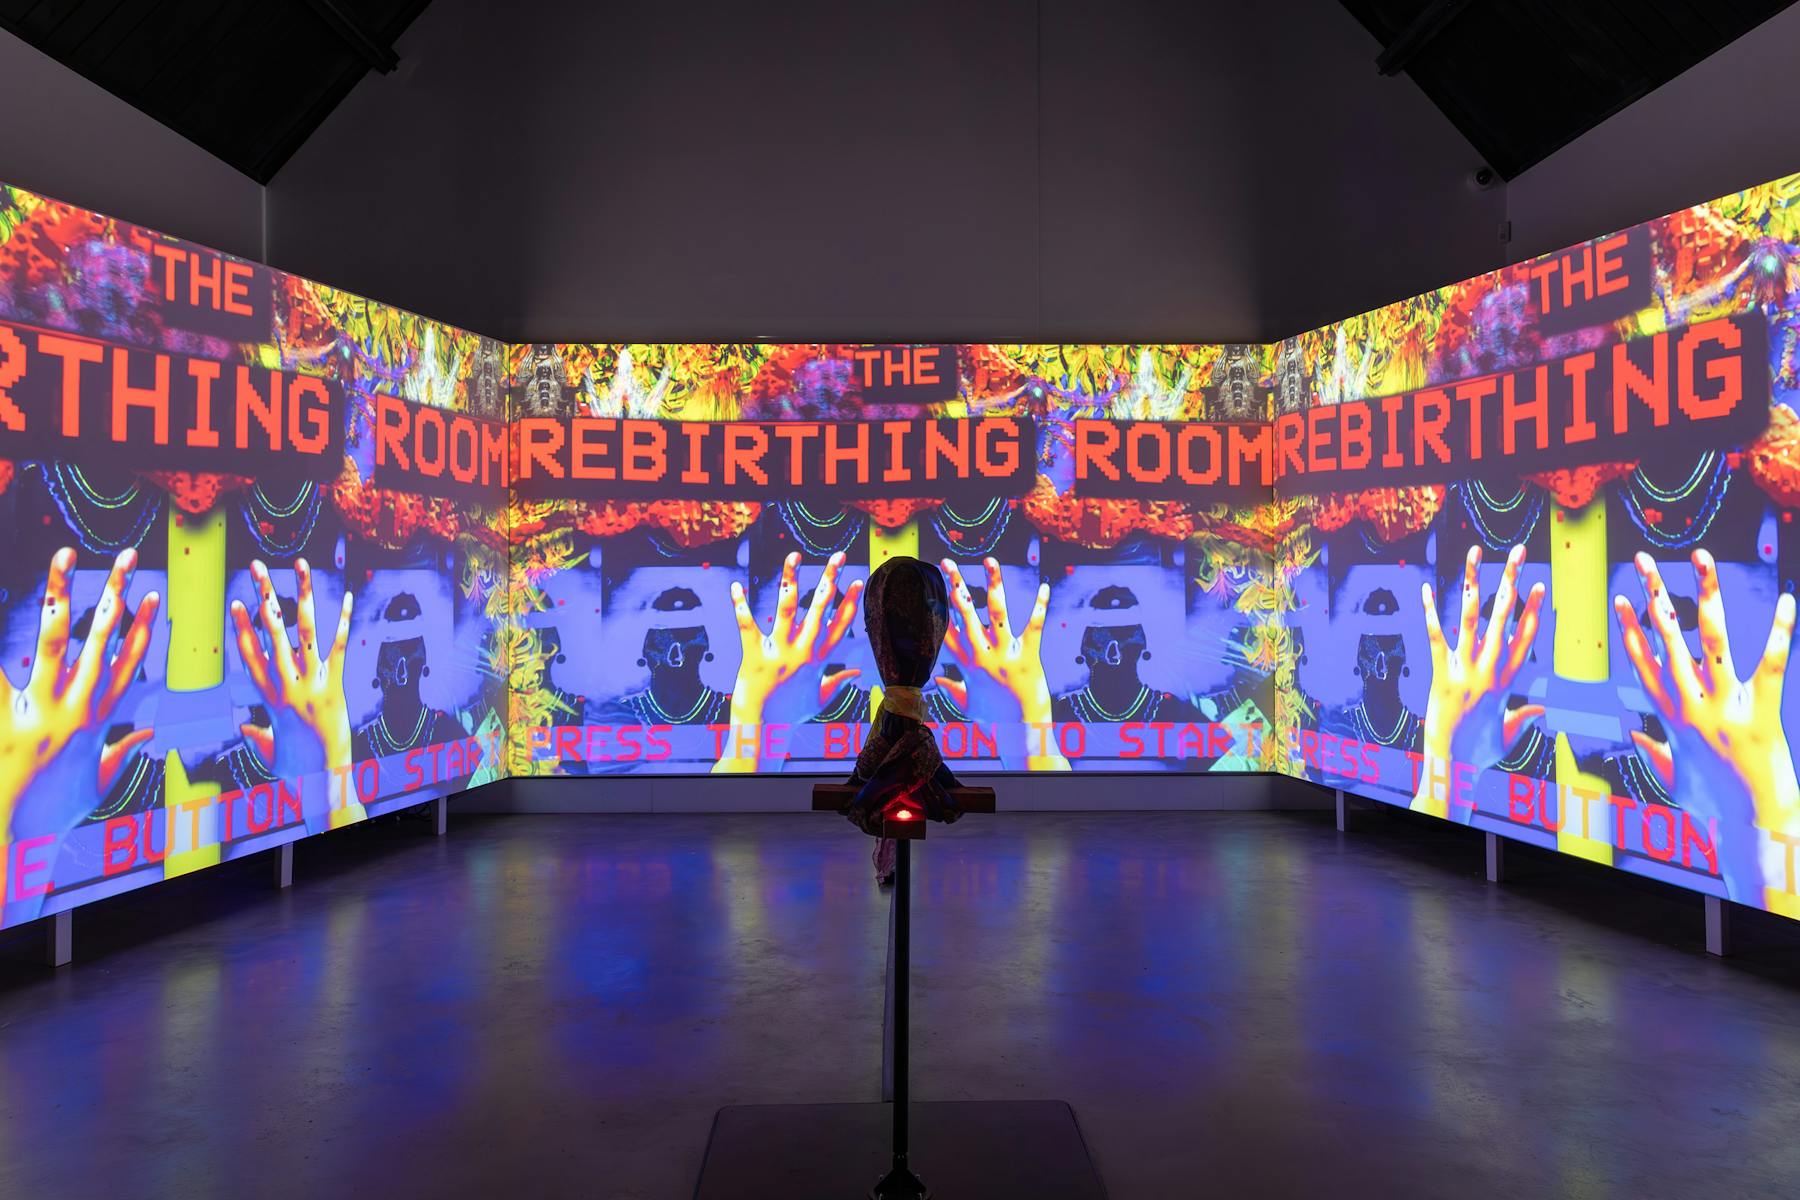 a photograph of three screens that are projected with bright and graphic images. There is text that reads 'THE REBIRTHING ROOM'. In the foreground there is a hooded object on a stand. 